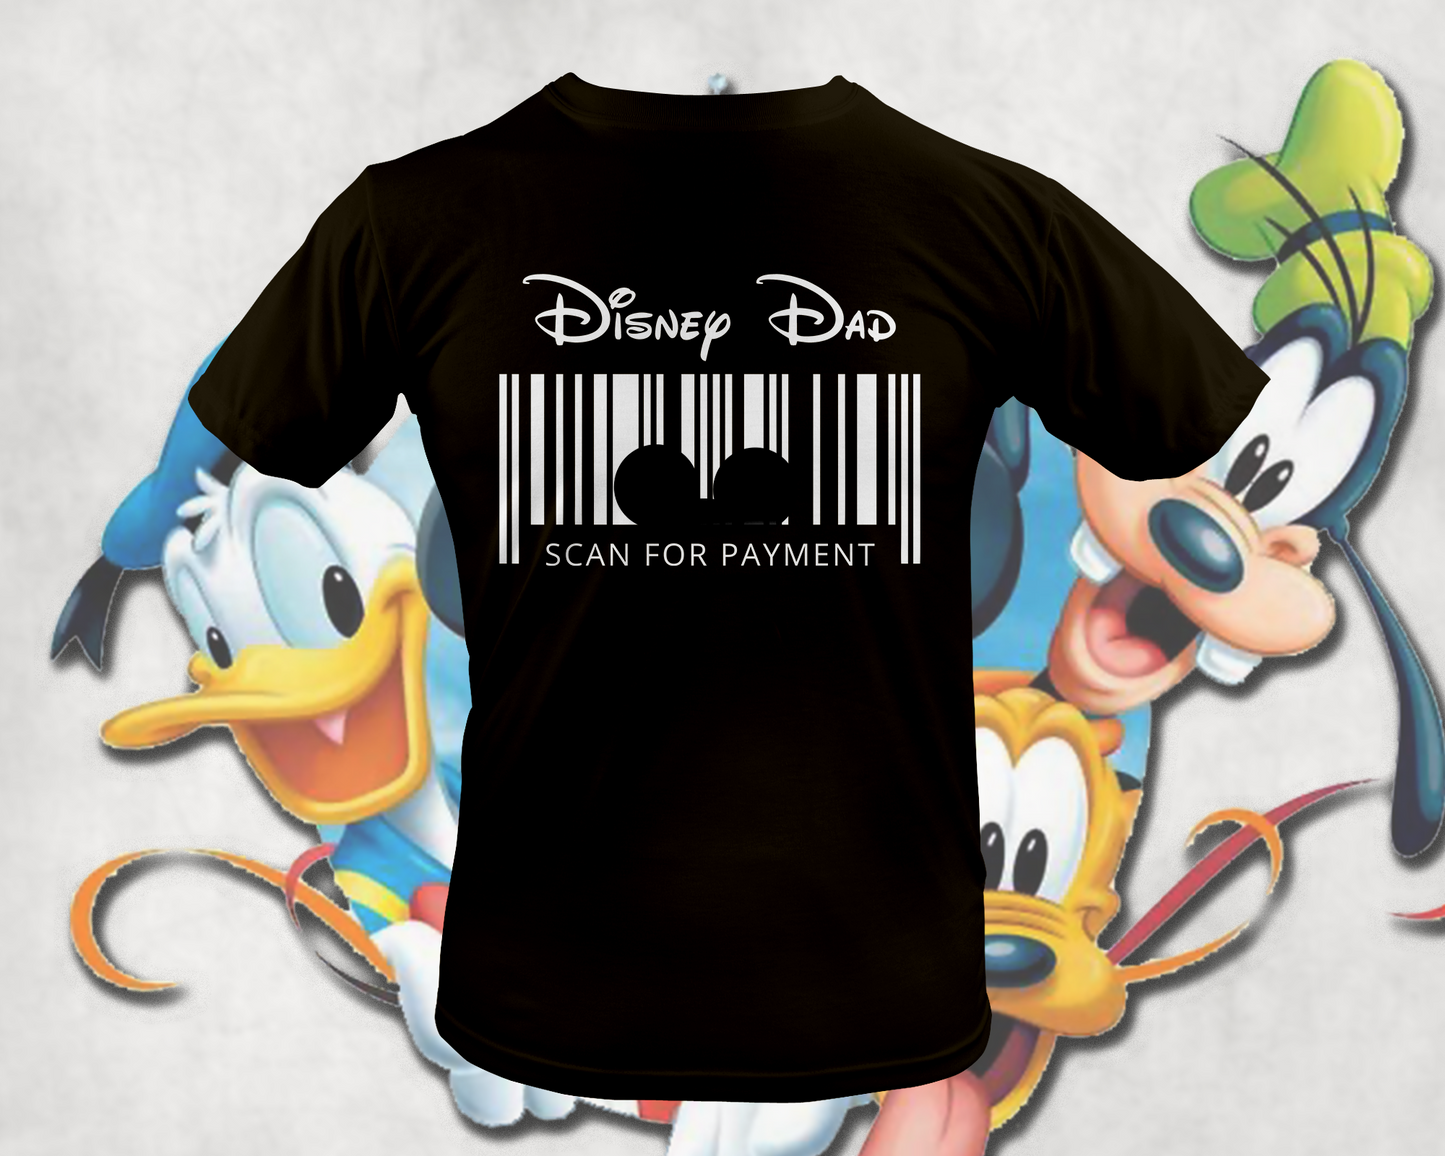 DISNEY DAD - SCAN FOR PAYMENT